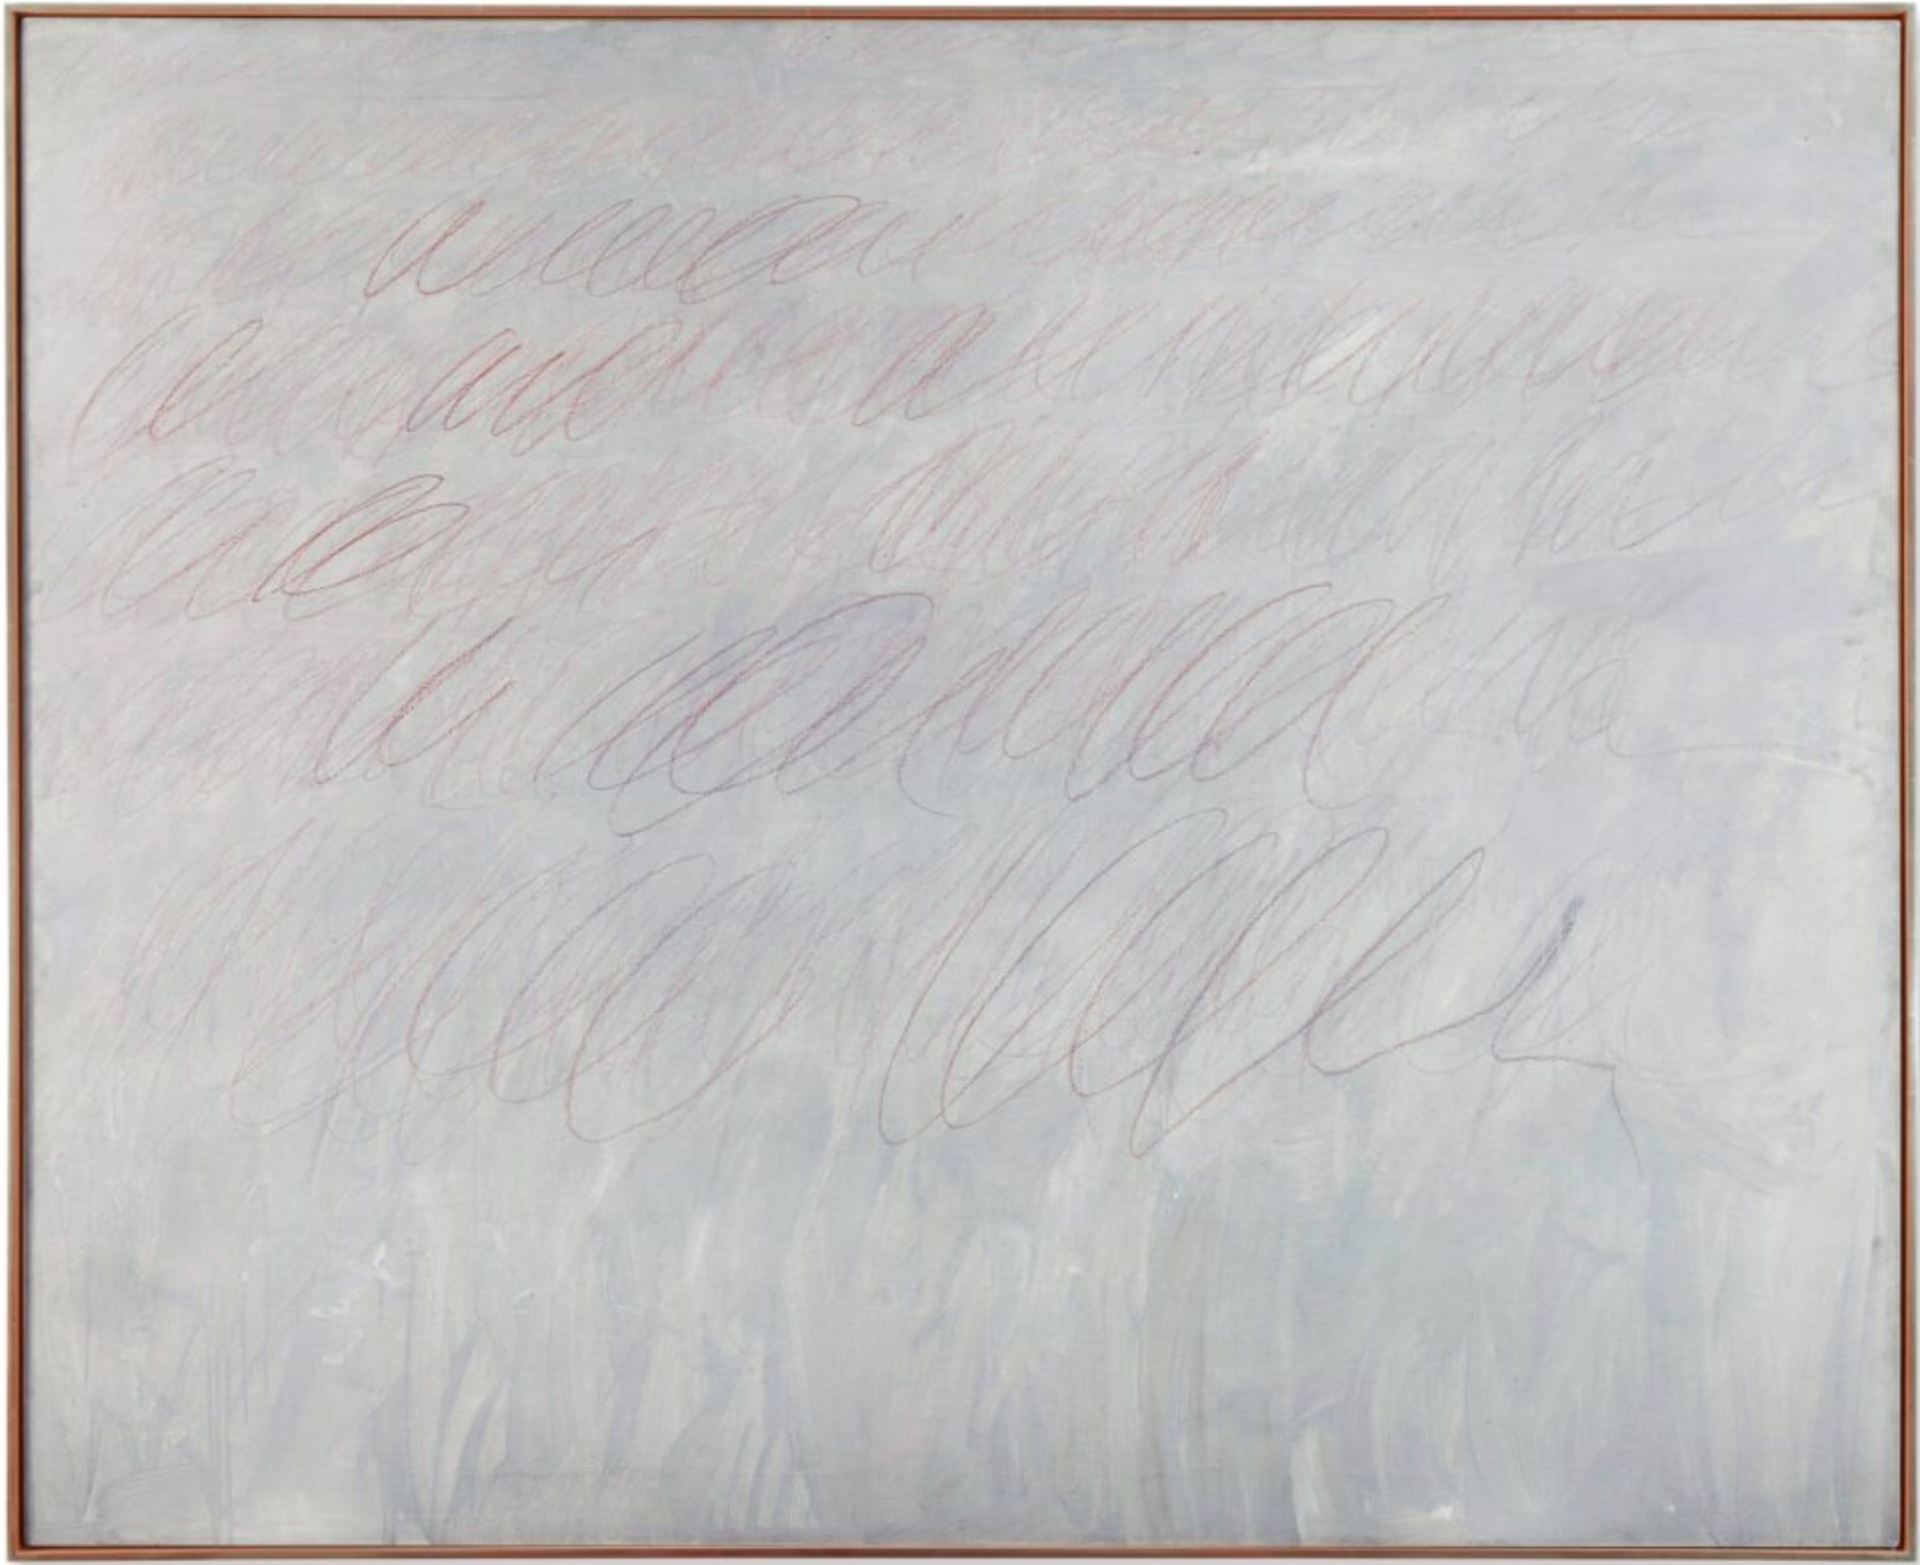 An oil based house paint and wax crayon work by Cy Twombly against a white background.